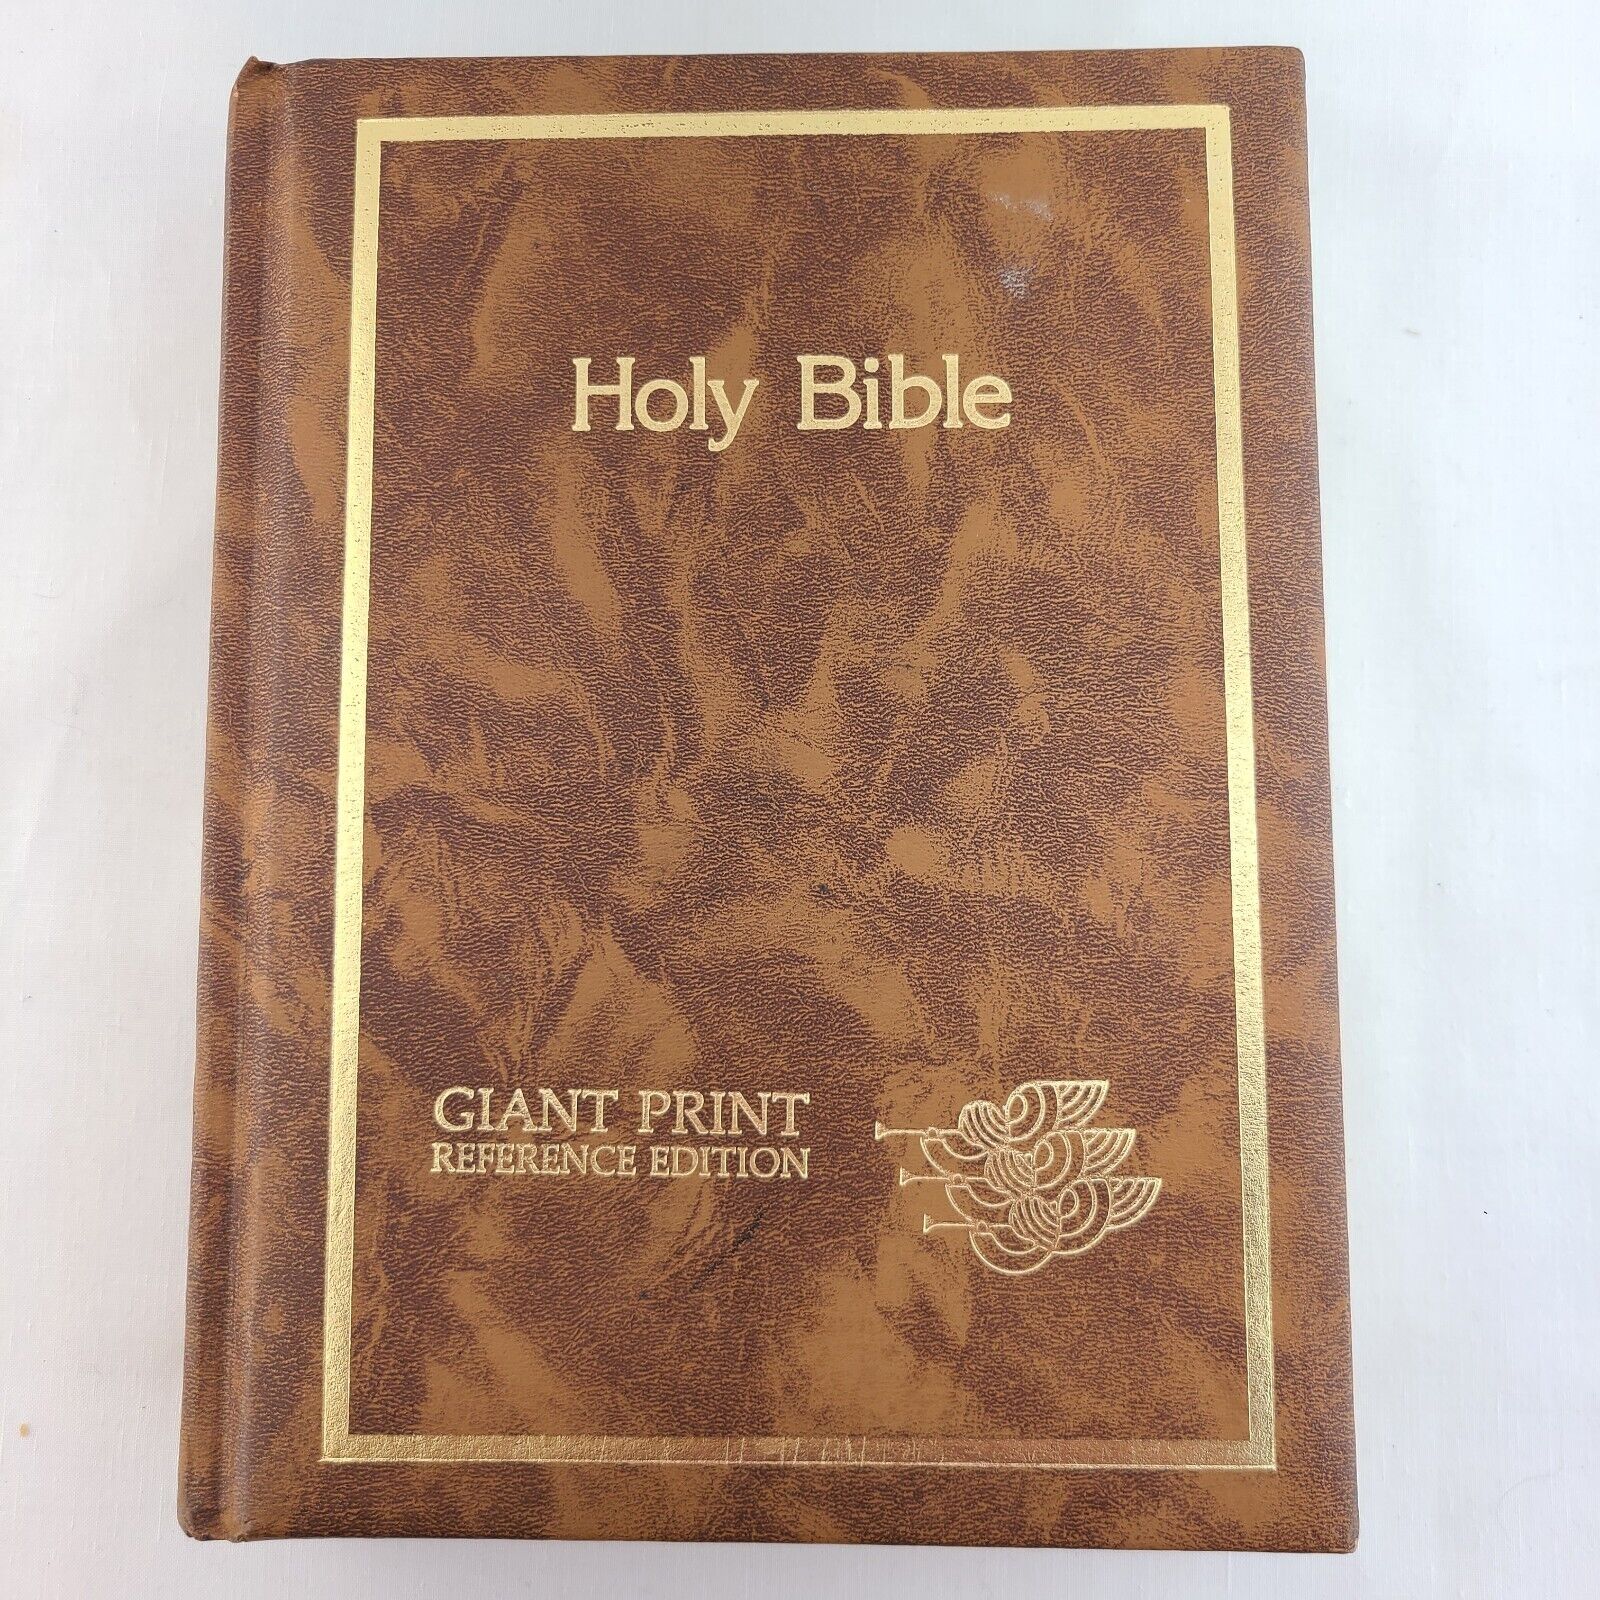 Vtg. KJV HOLY BIBLE Giant Print Reference with Index Concordance Today Inc. 1976